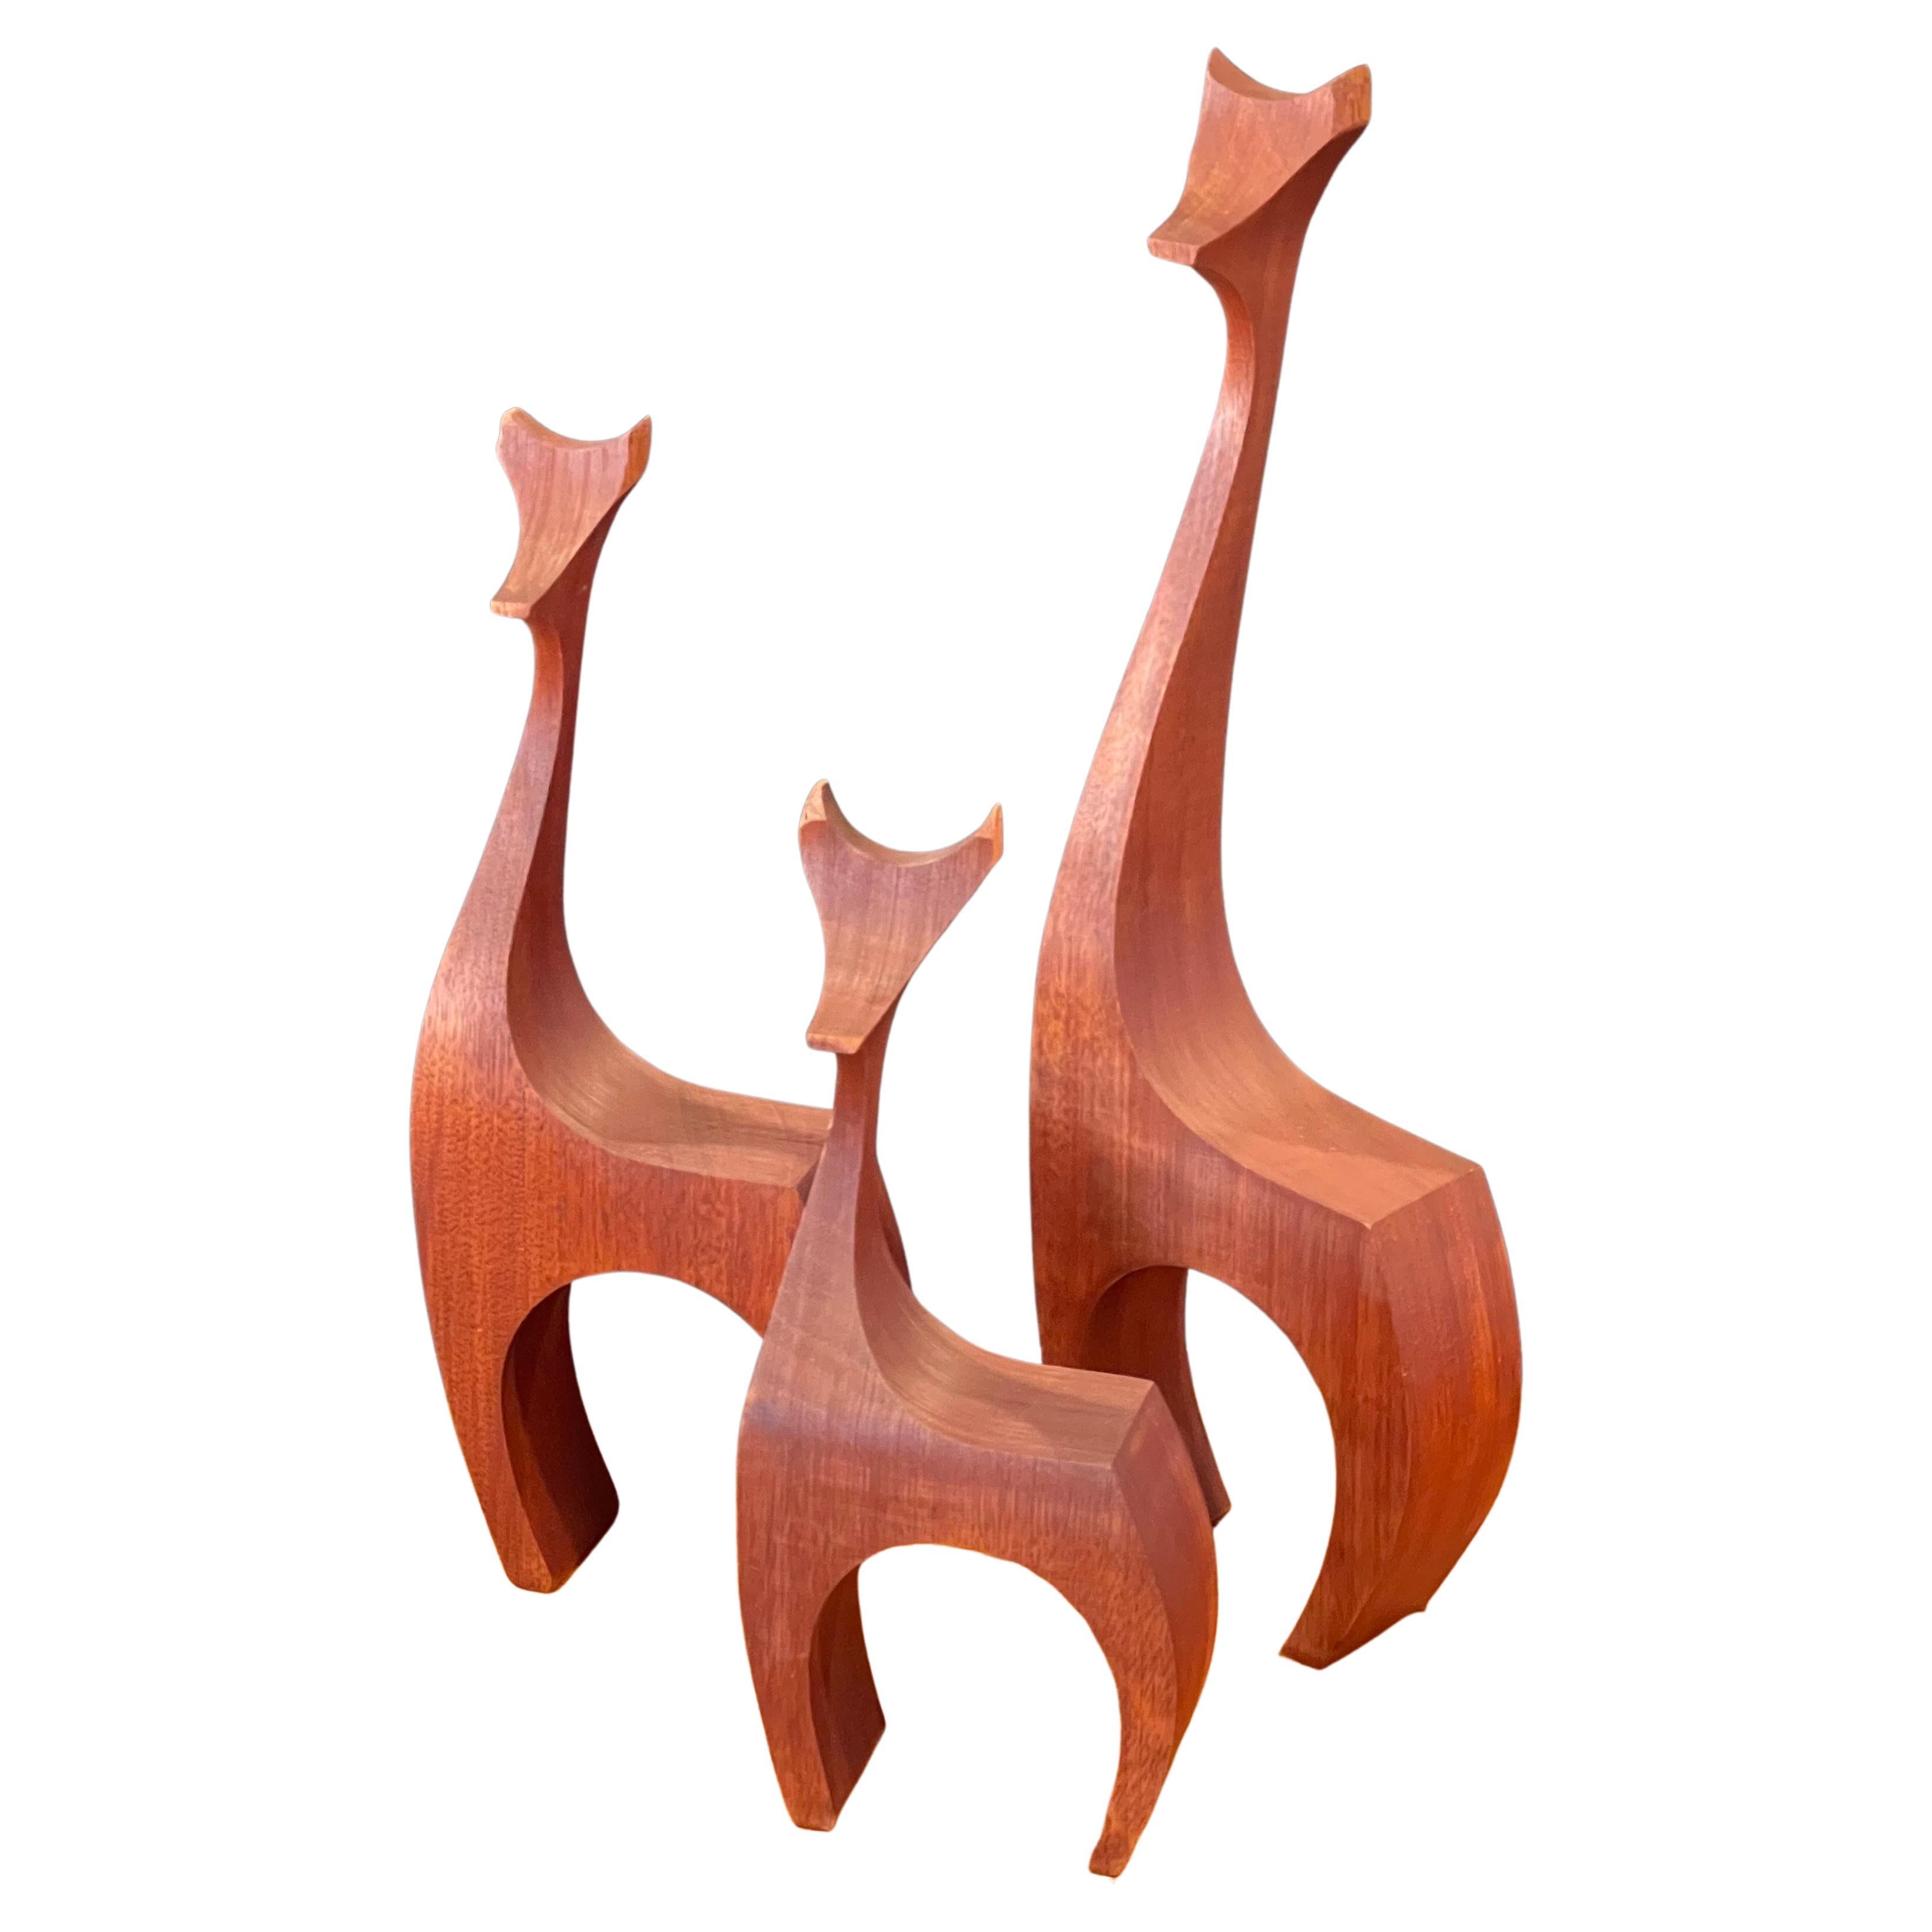 Set of Three Modernist Giraffe Wood Sculptures by Del Zotto Studios For Sale 10